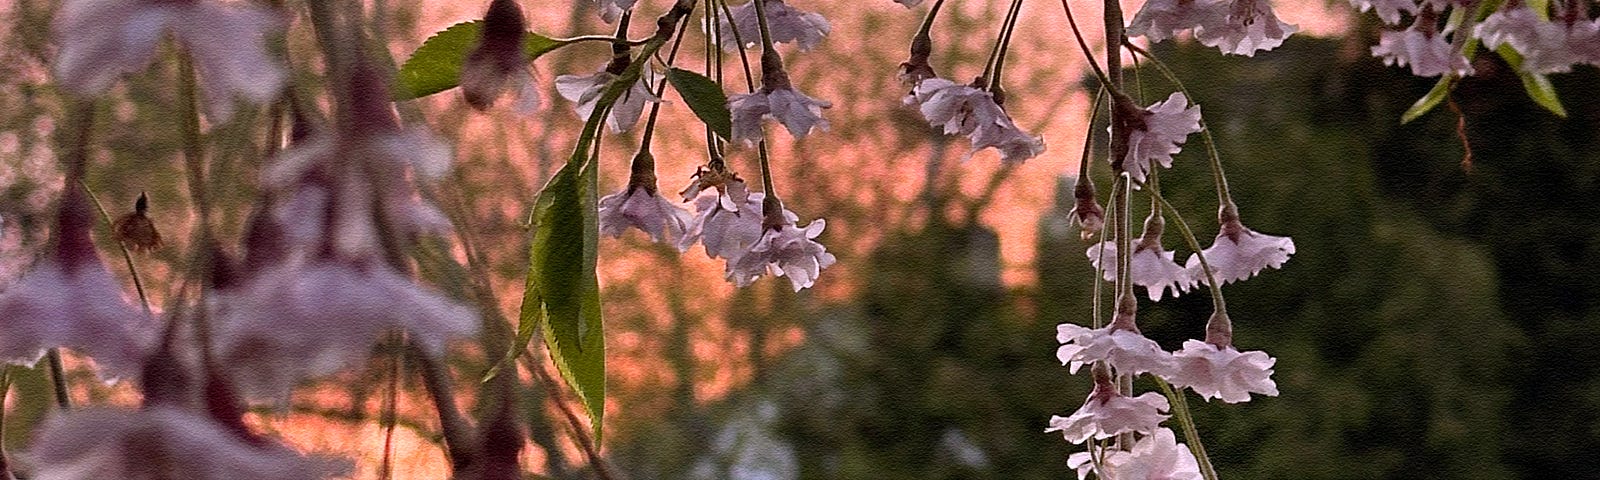 Spring, walking at sunset, nature’s mood booster amidst pink weeping cherry tree blossoms | © pockett dessert